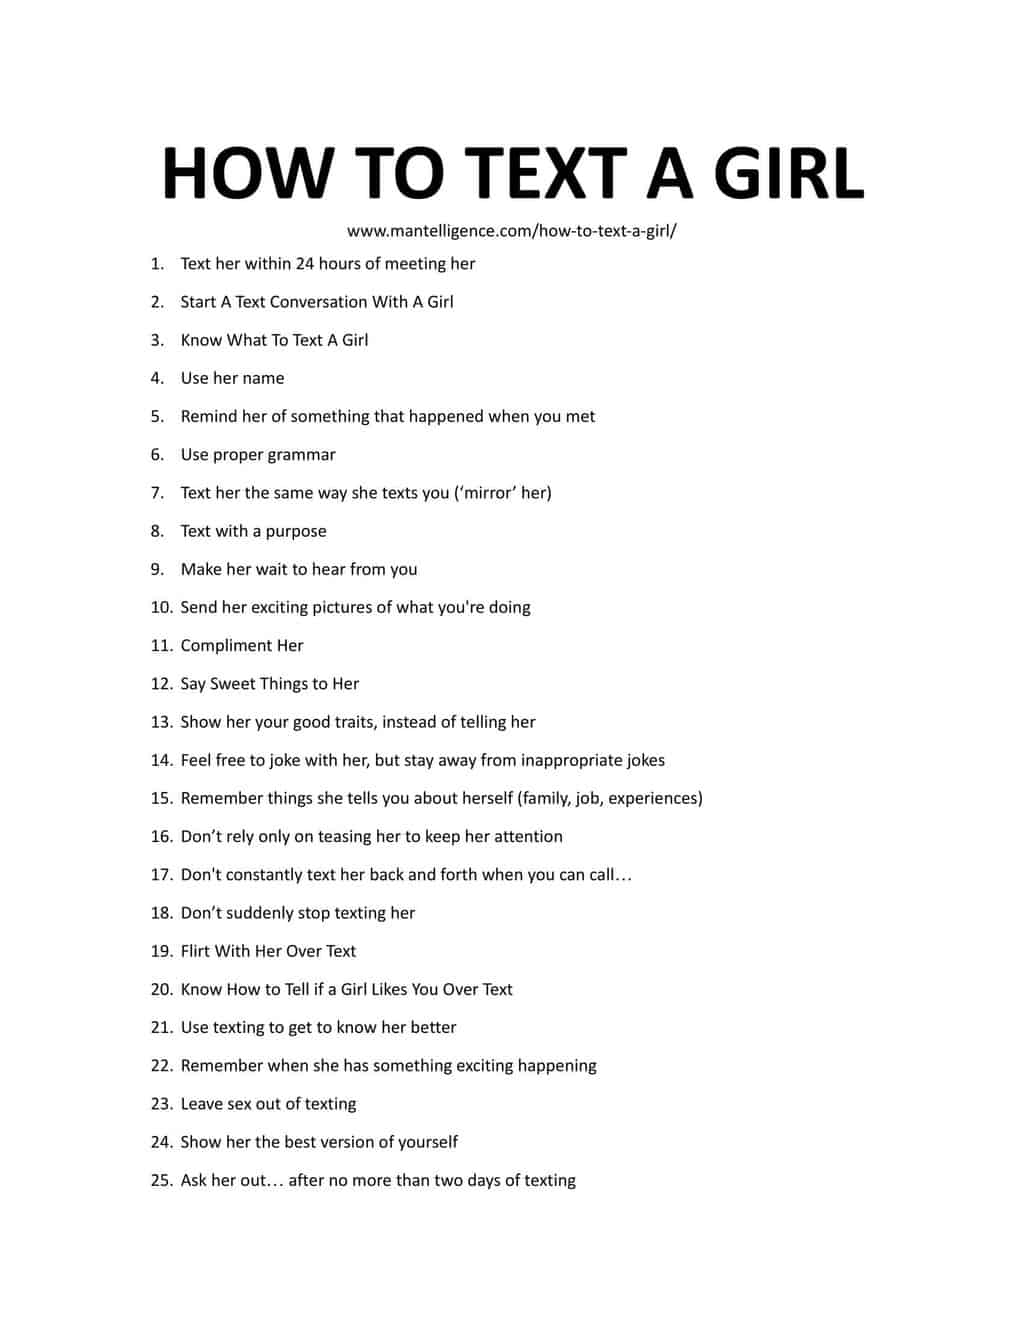 List of Downloadable List of HOW TO TEXT A GIRL